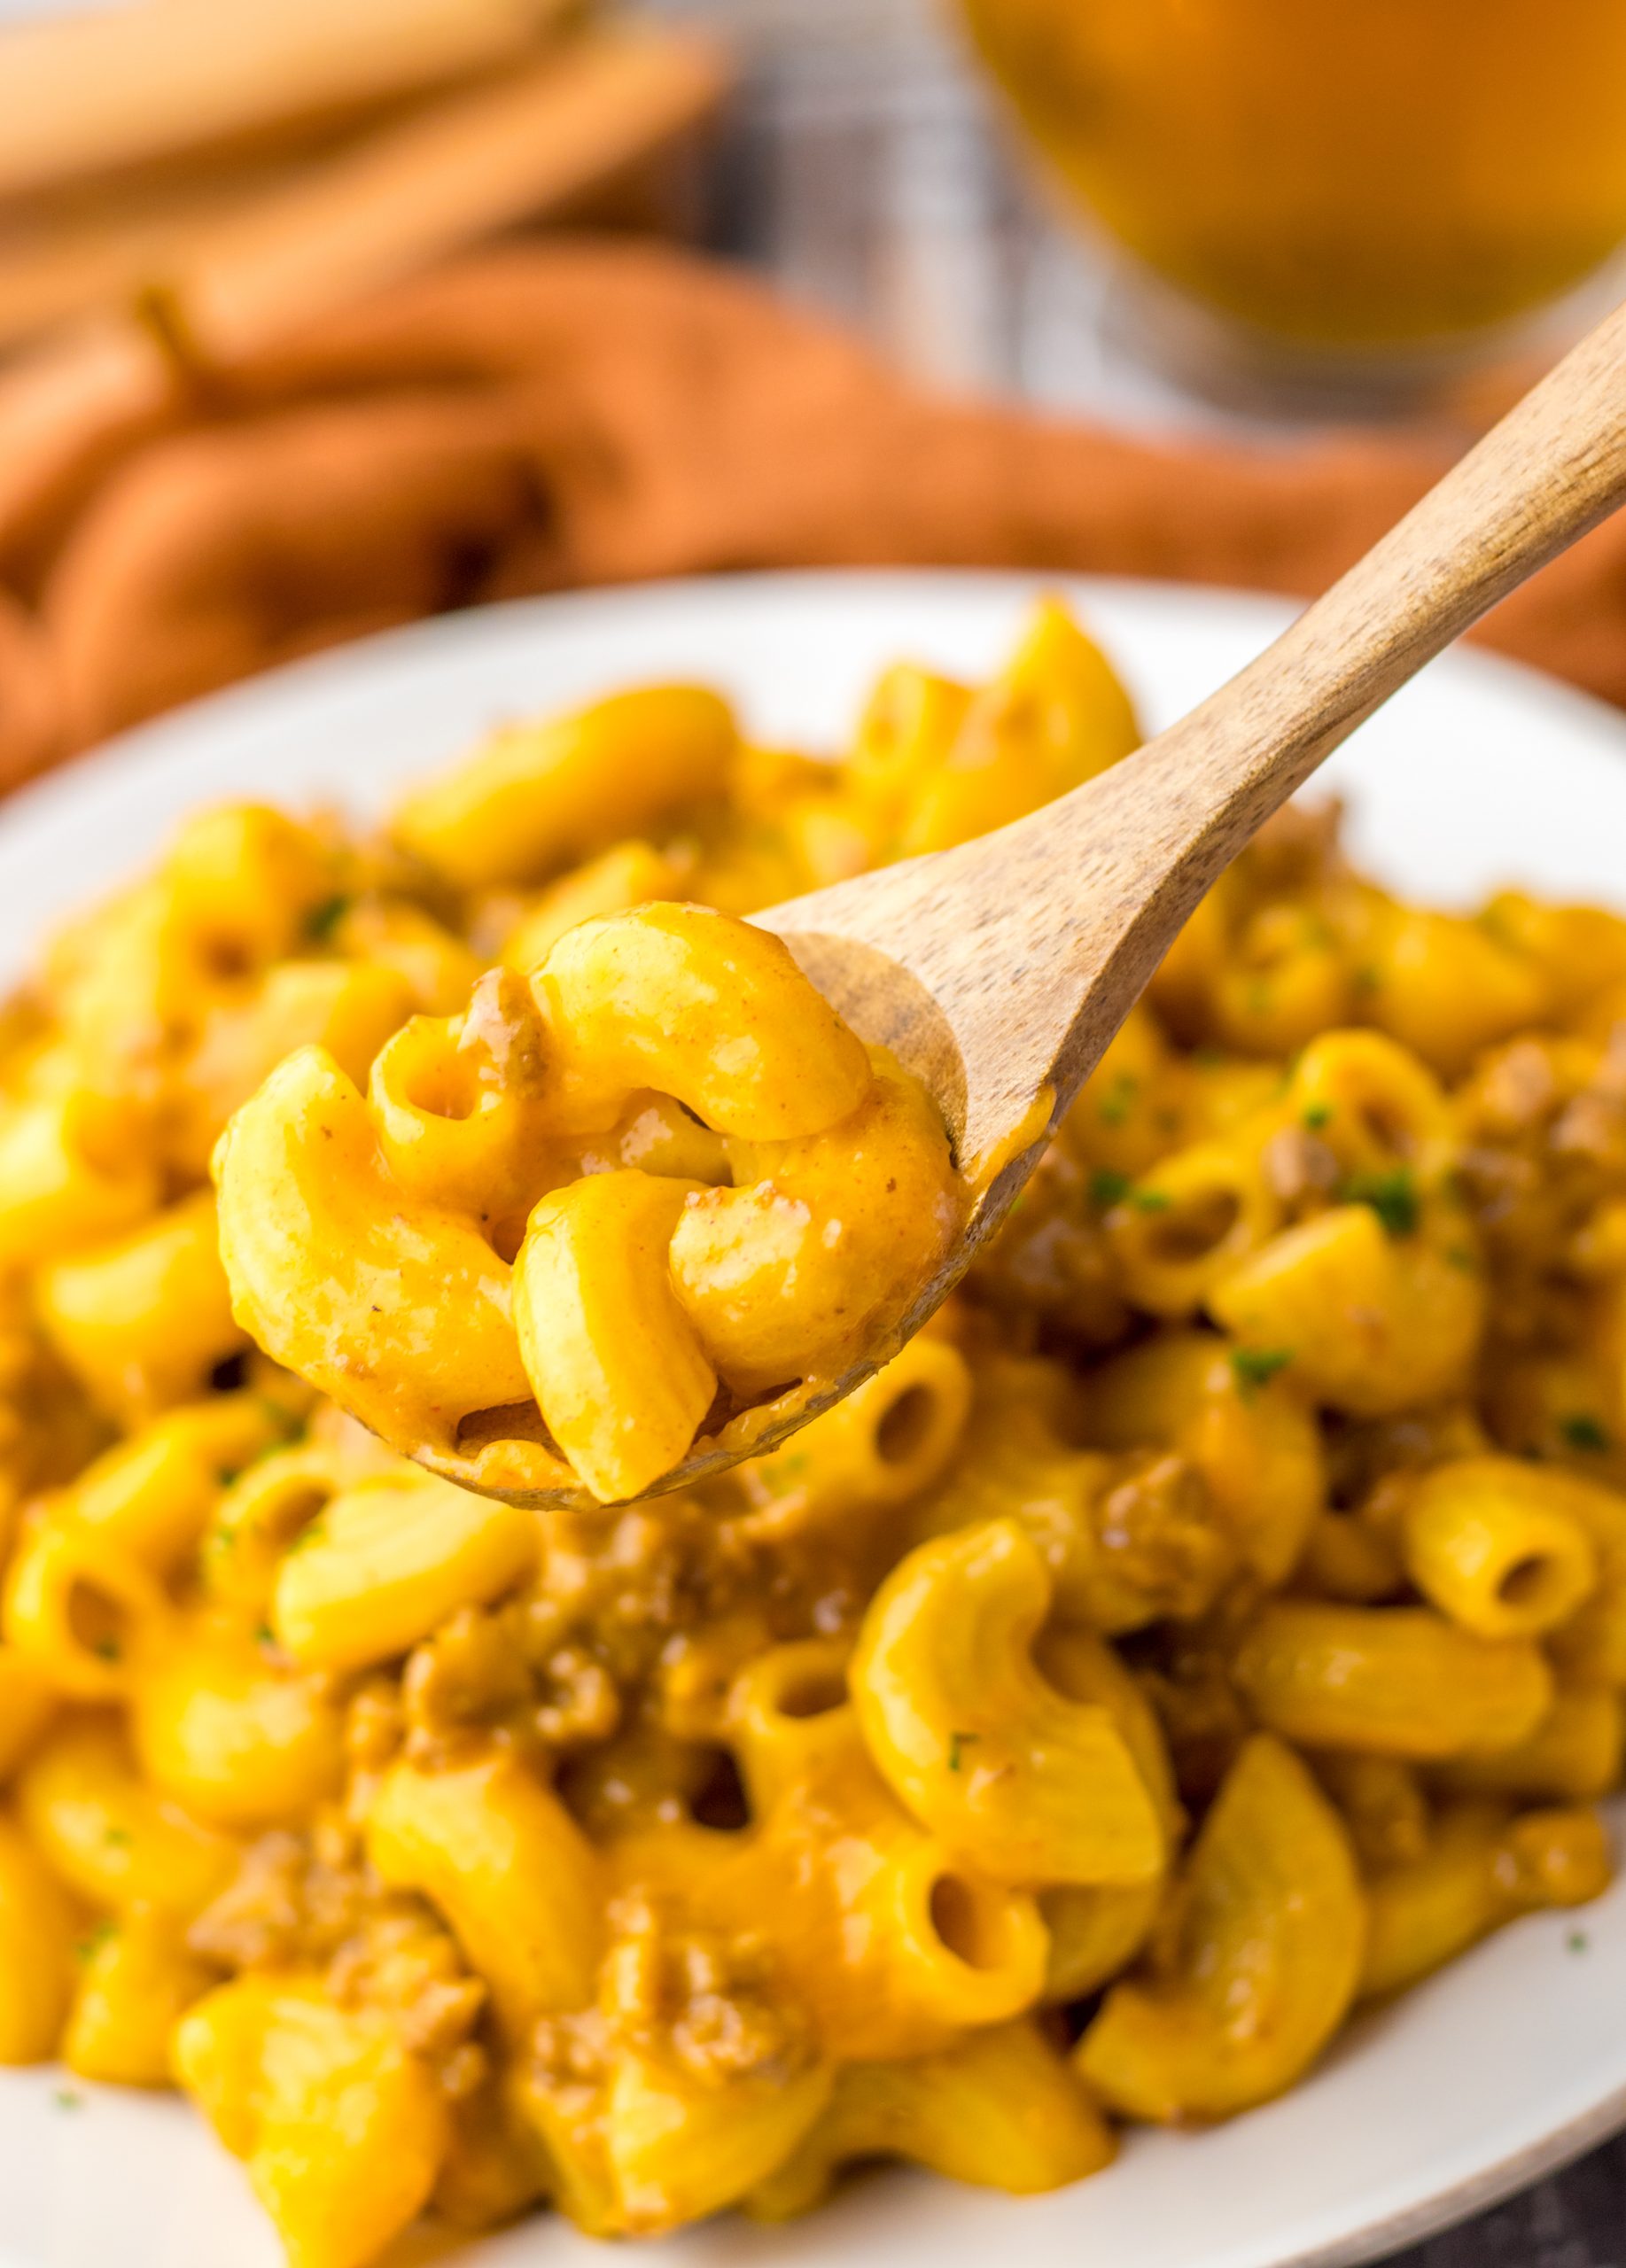 Macaroni and cheese in a bowl with a wooden spoon.